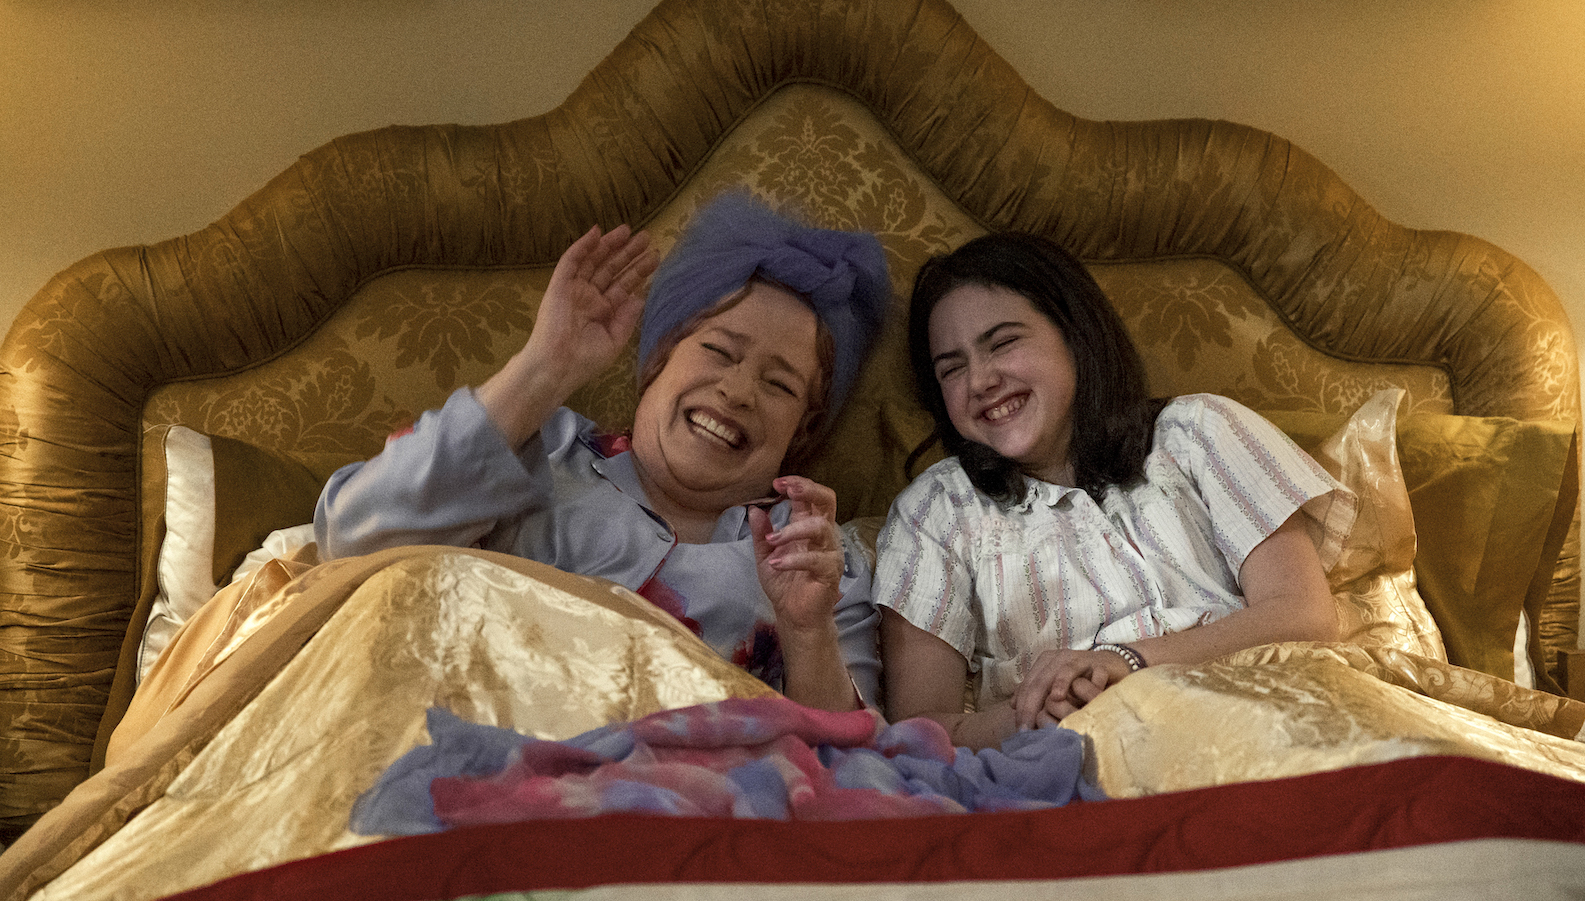 A mother and daughter laugh in bed together